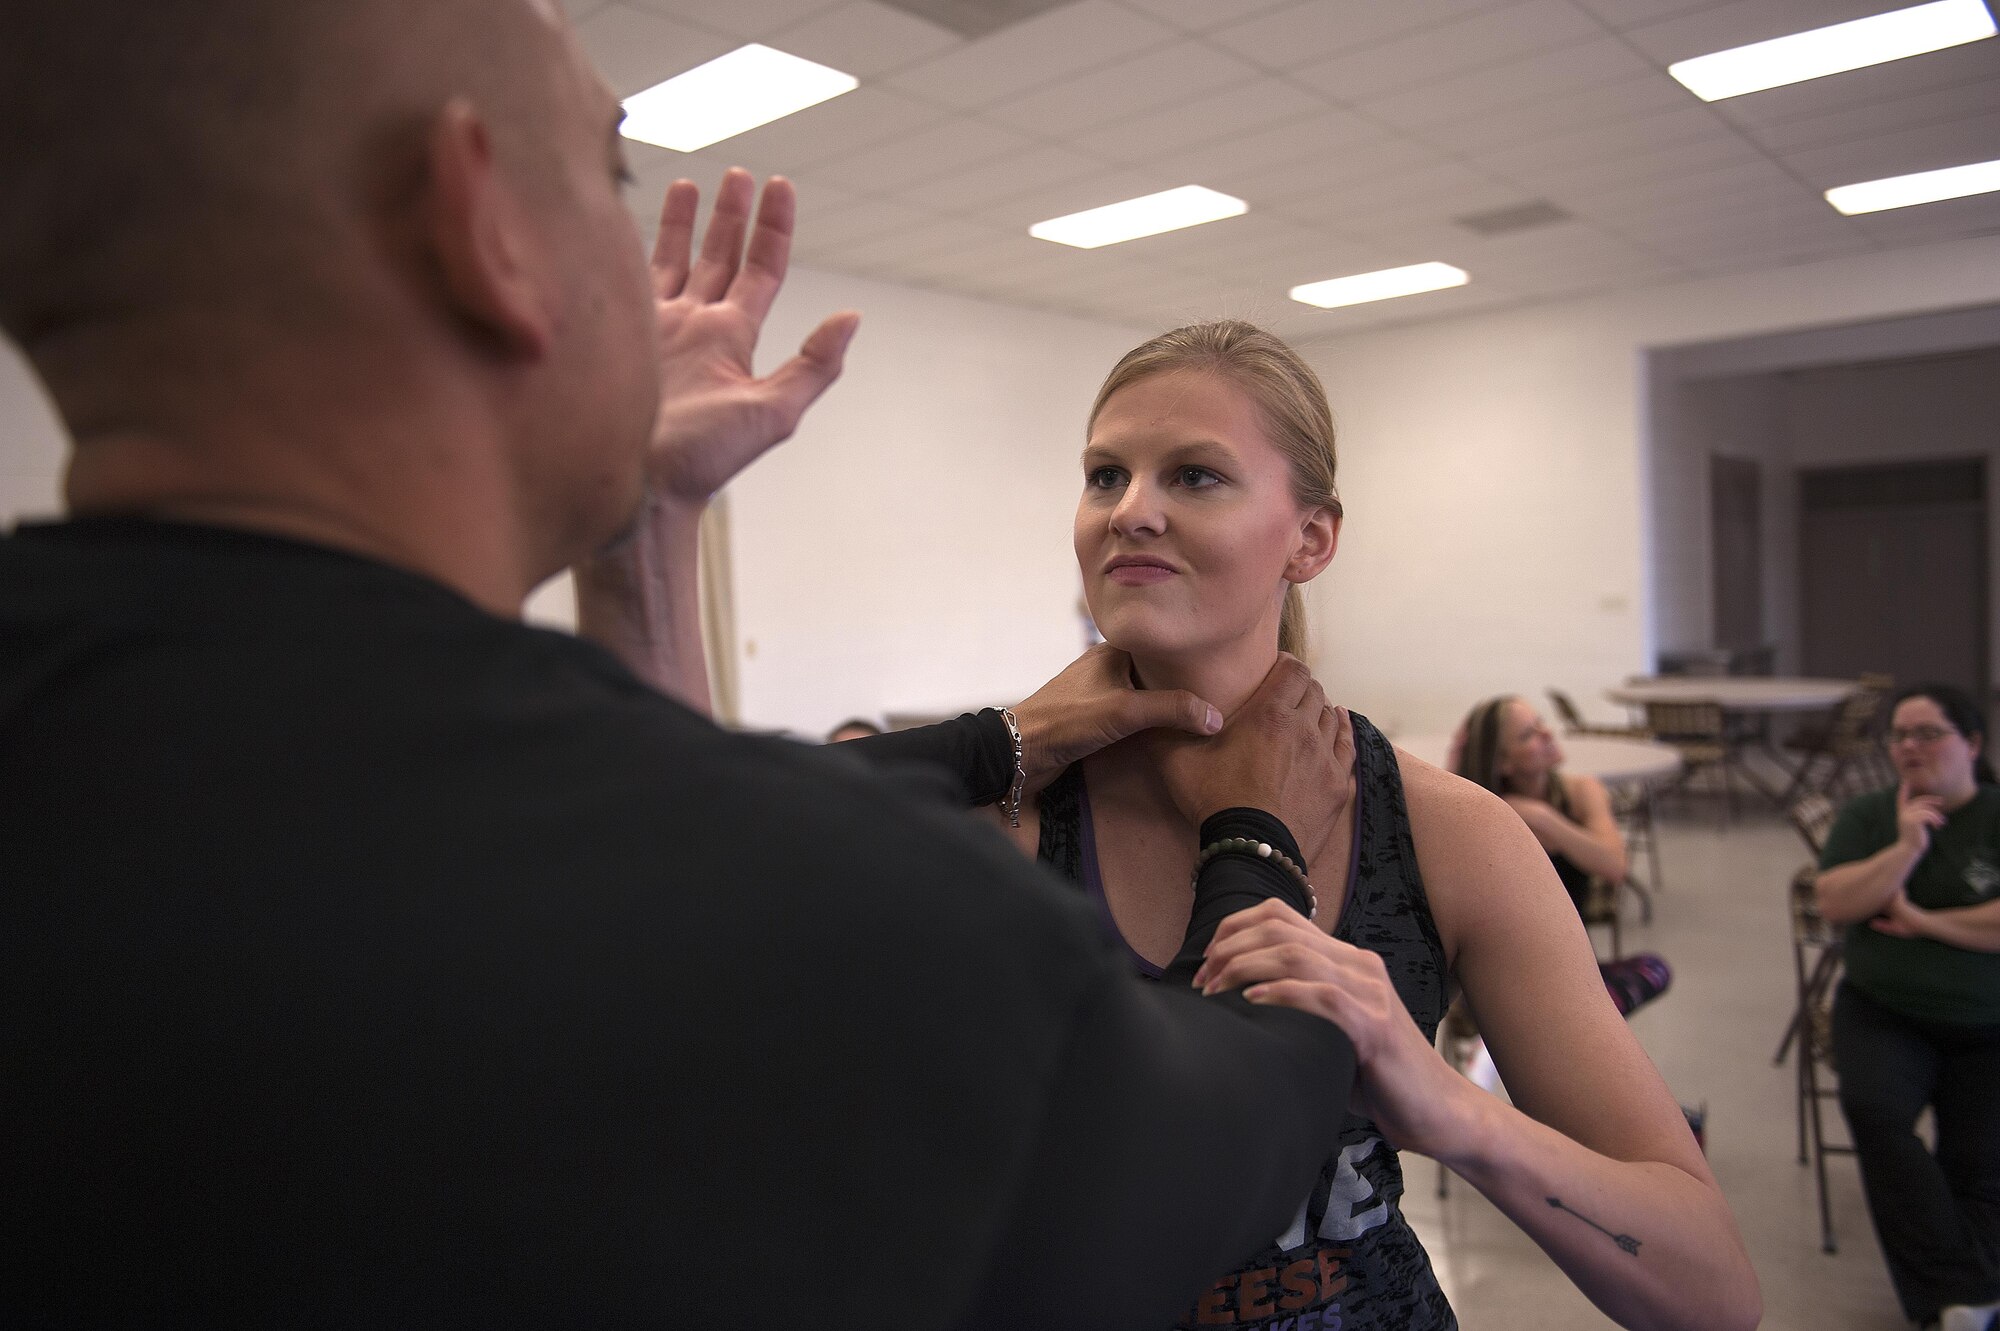 U.S. Air Force Staff Sgt. Adriene Anderson, 315th Training Squadron instructor, performs a palm strike to the face during a self-defense class at St. Marks Presbyterian Church, San Angelo, Texas, Feb. 27, 2016. Anderson initiated the Mommy Fit Camp program in August of 2015 as part of the Make Goodfellow Great Initiative for Goodfellow Air Force Base. (U.S. Air Force photo by Airman 1st Class Caelynn Ferguson/Released)